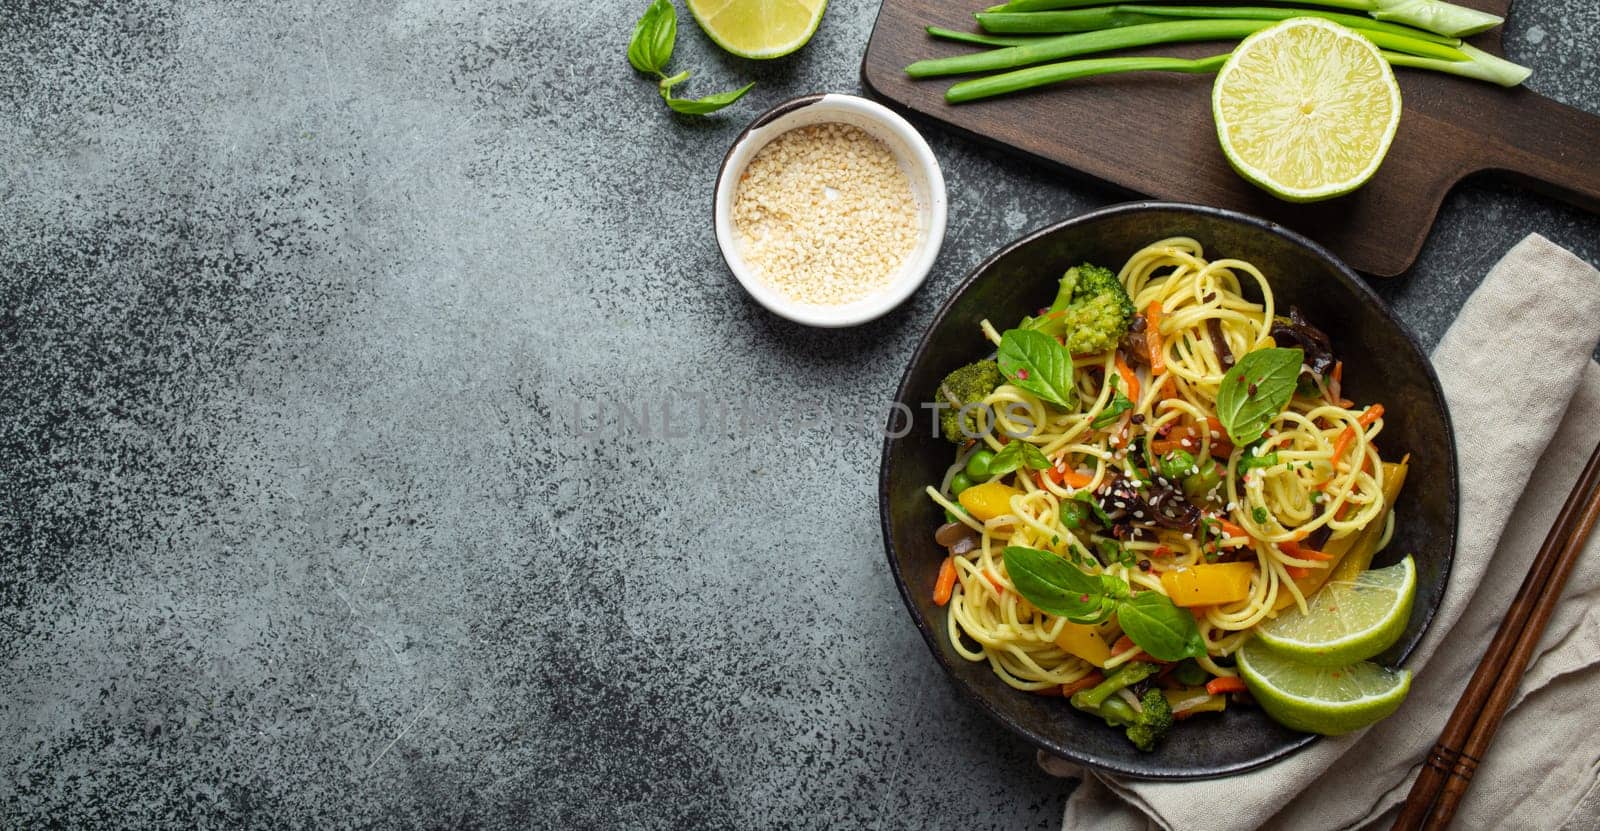 Asian vegetarian noodles with vegetables and lime in black rustic ceramic bowl, wooden chopsticks, cutting board with chopped green onion top view, stone background. Cooking noodles, copy space by its_al_dente